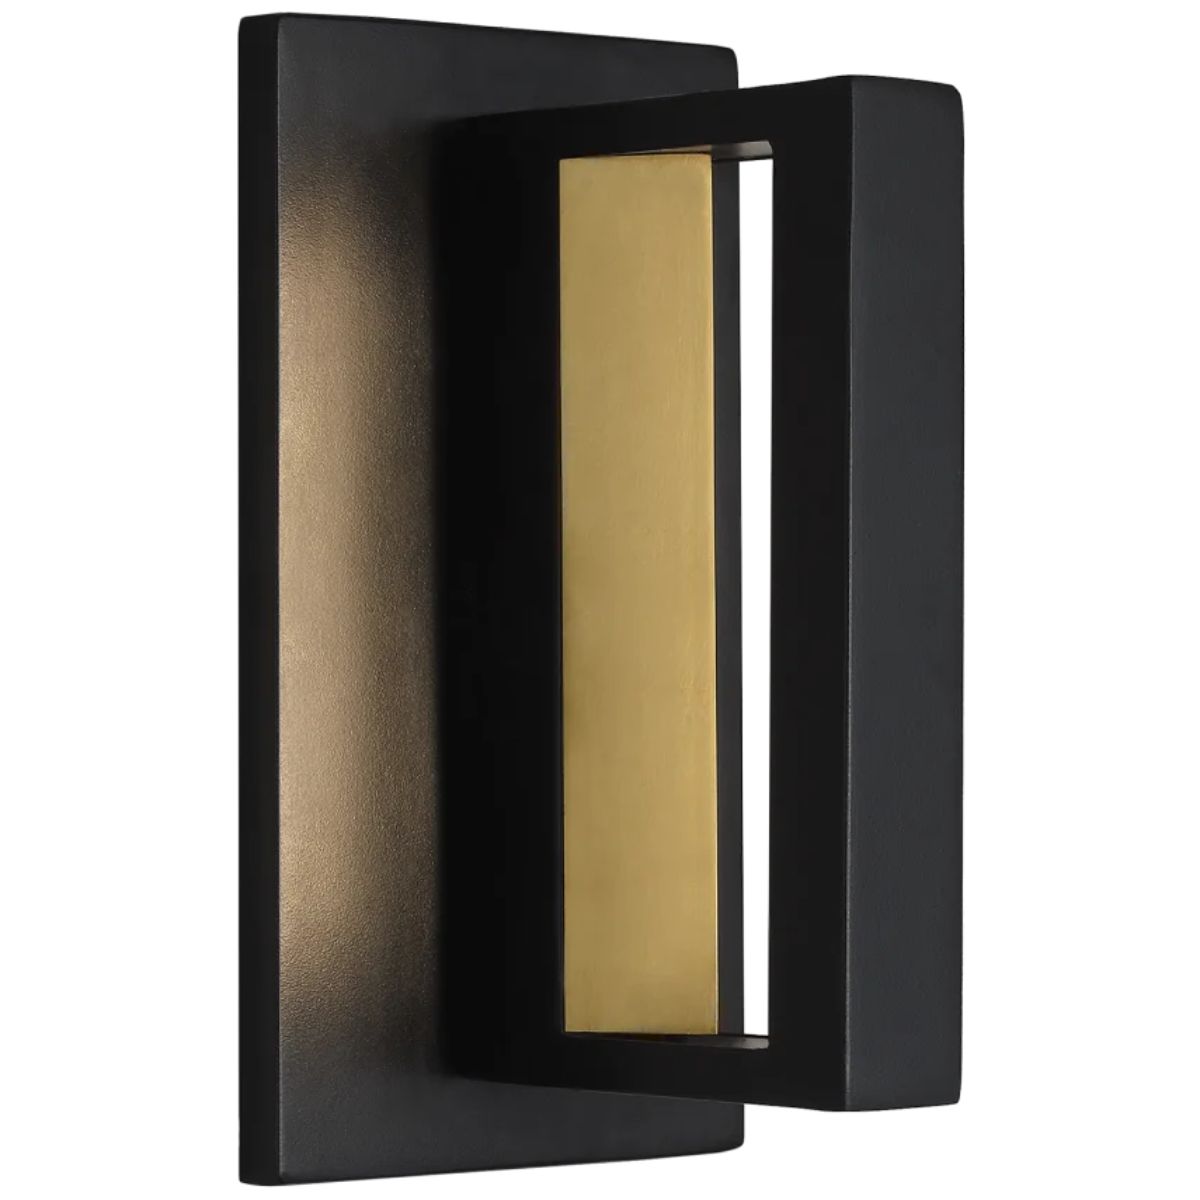 Anton 8 in. LED Wall Sconce Black finish